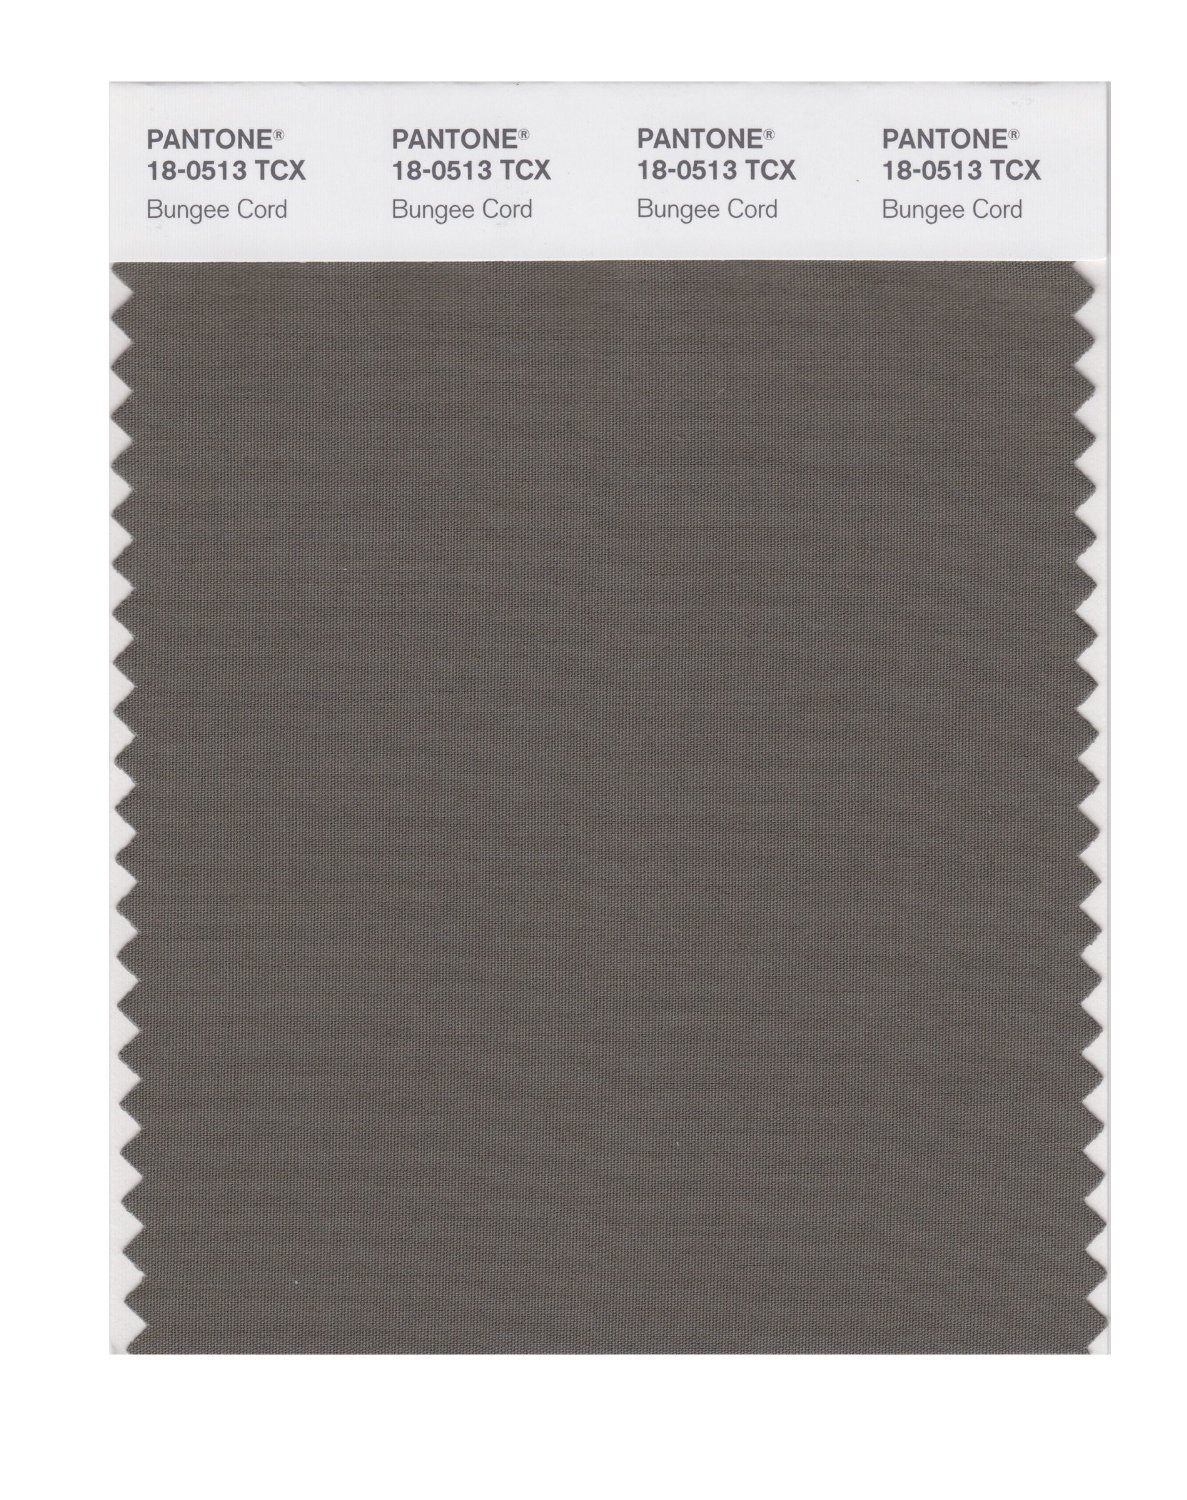 Pantone Cotton Swatch 18-0513 Bungee Cord